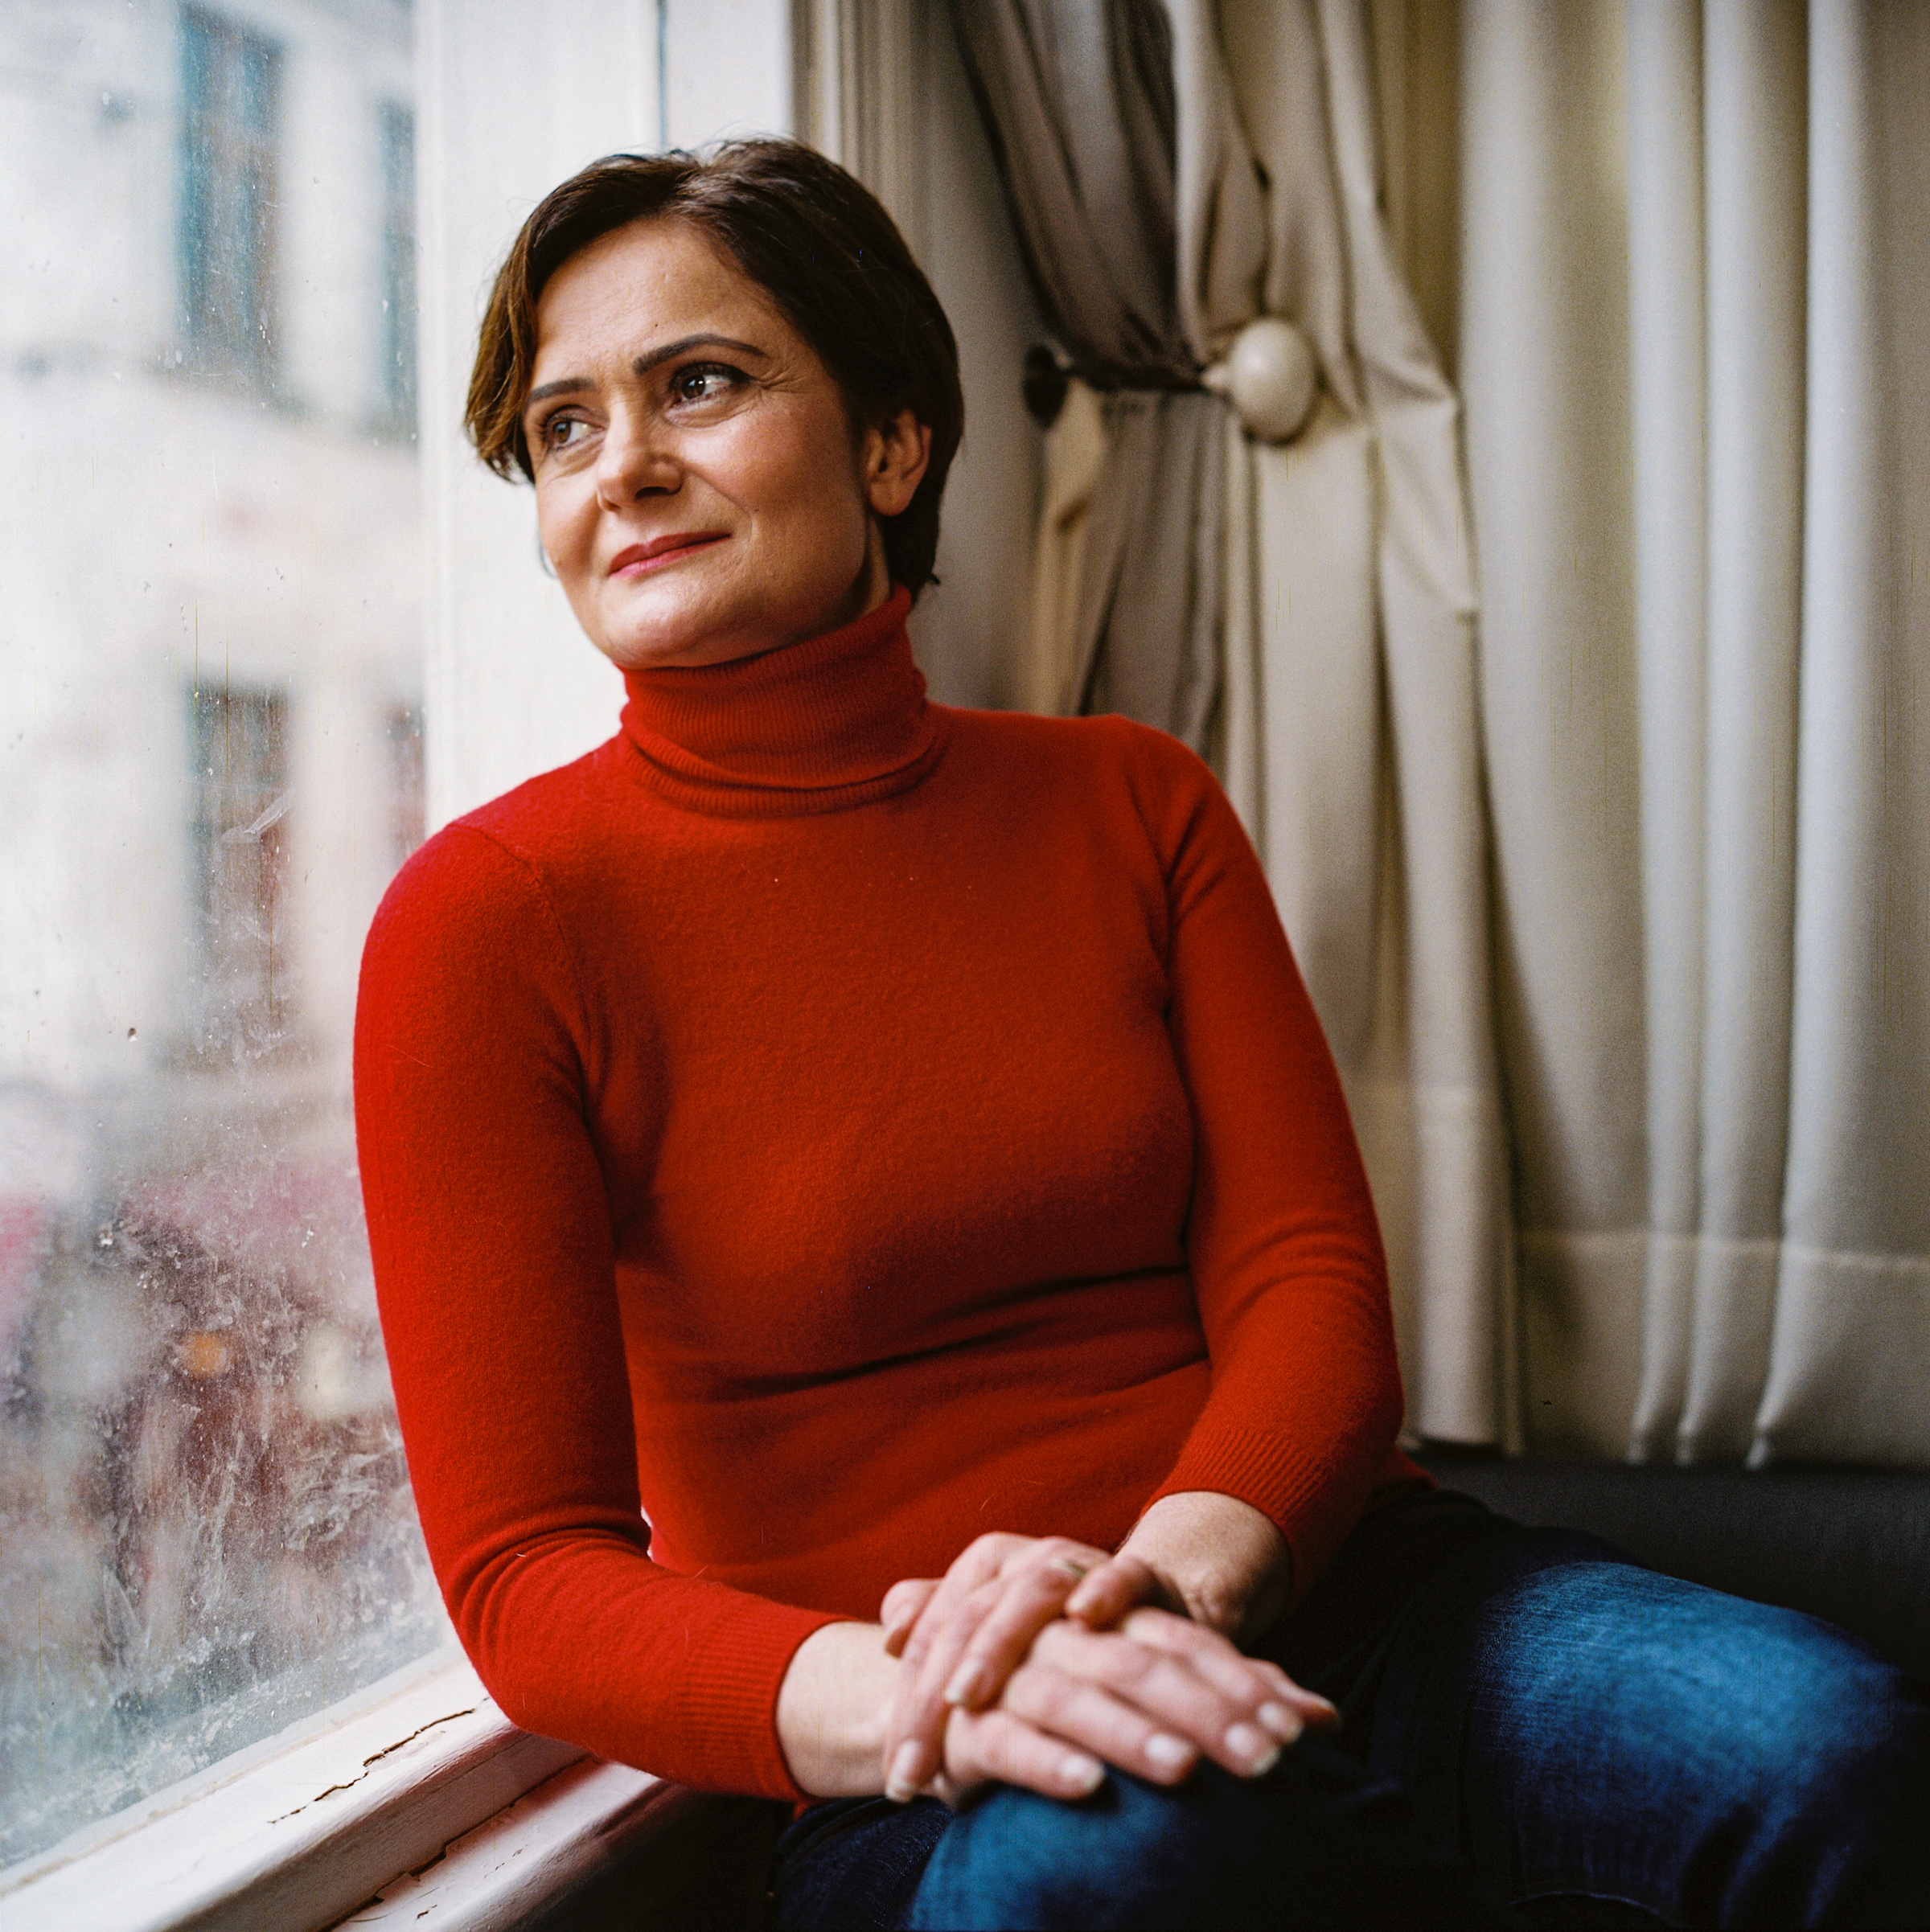 Dr. Canan Kaftancioglu at her friends' home in Istanbul on Feb. 14, 2021. (Rena Effendi for TIME)